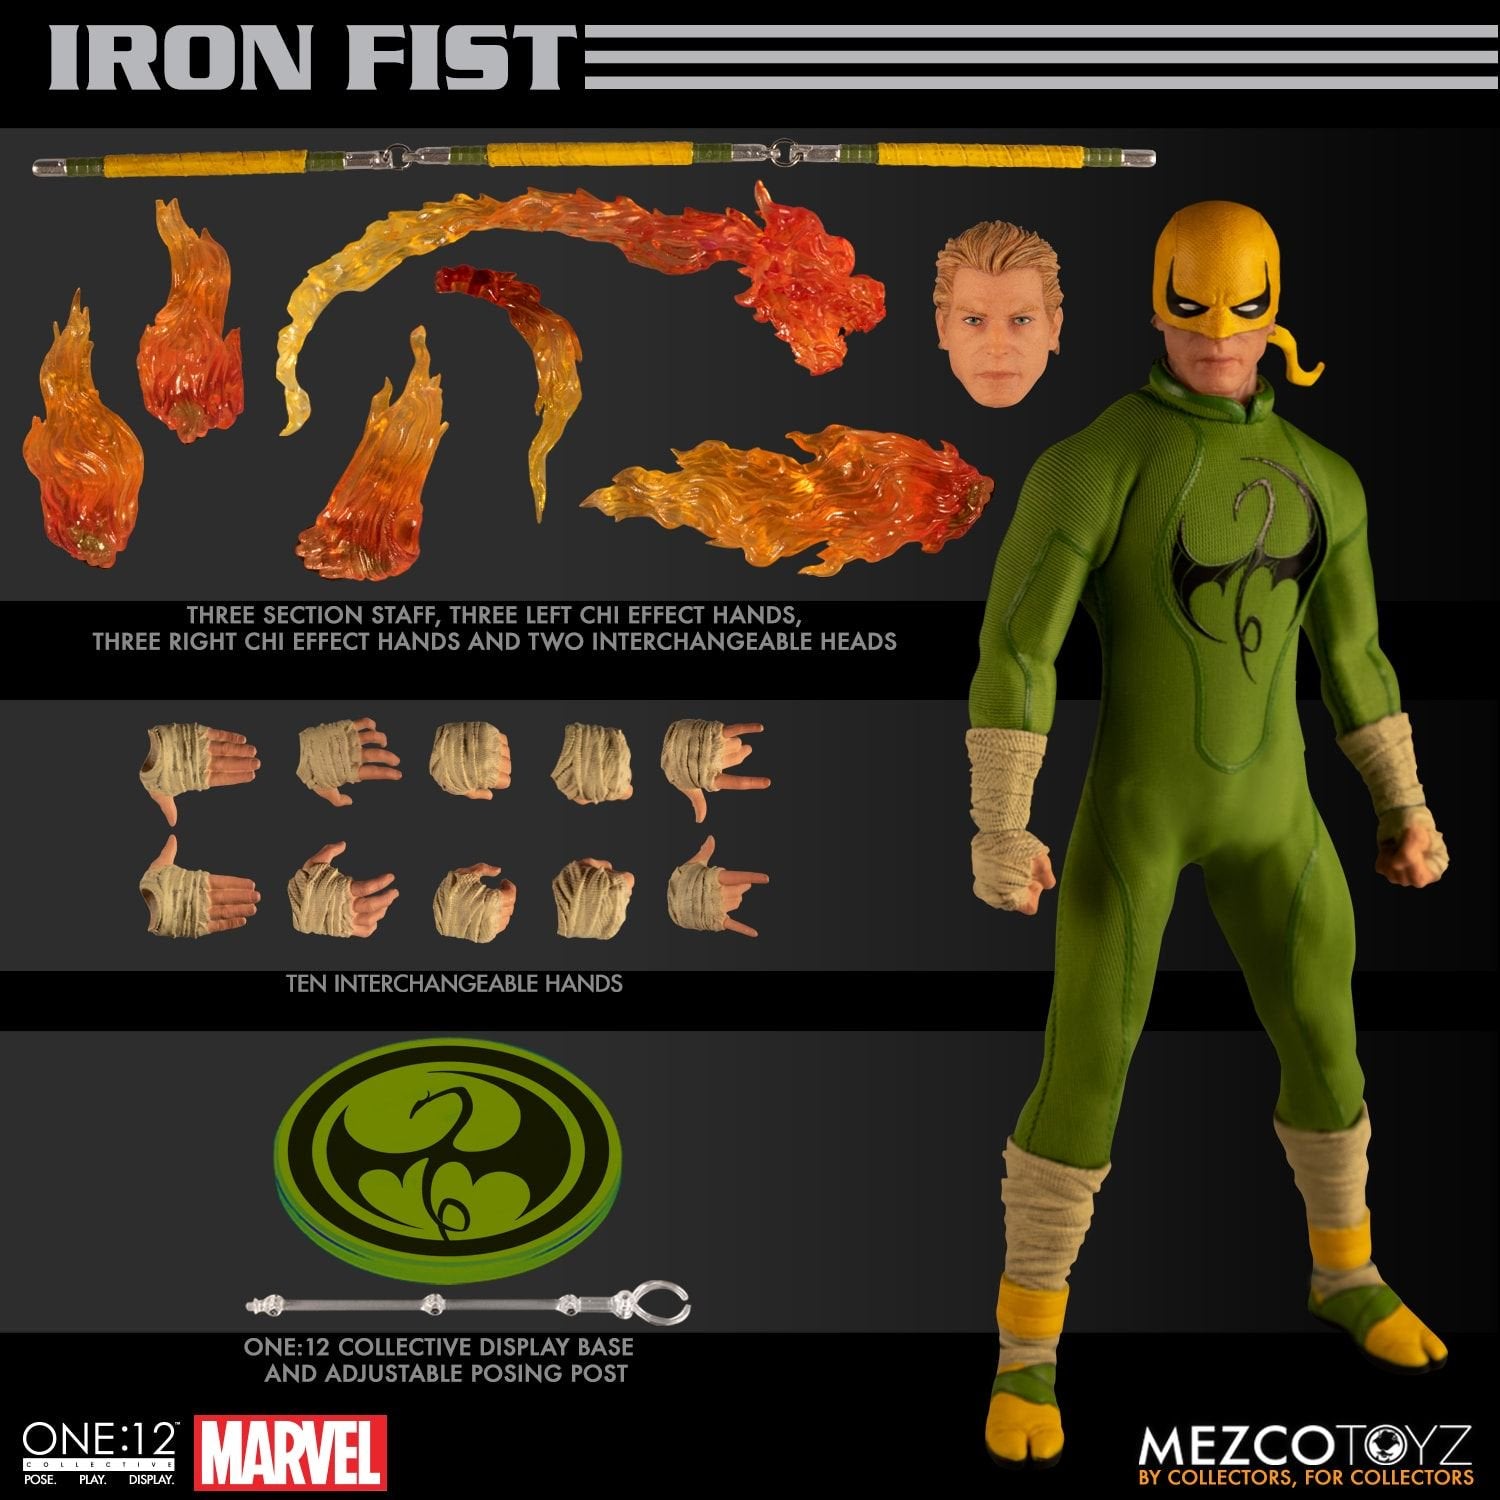 Mezco Toys One:12 Collective: Iron Fist Action Figure 1